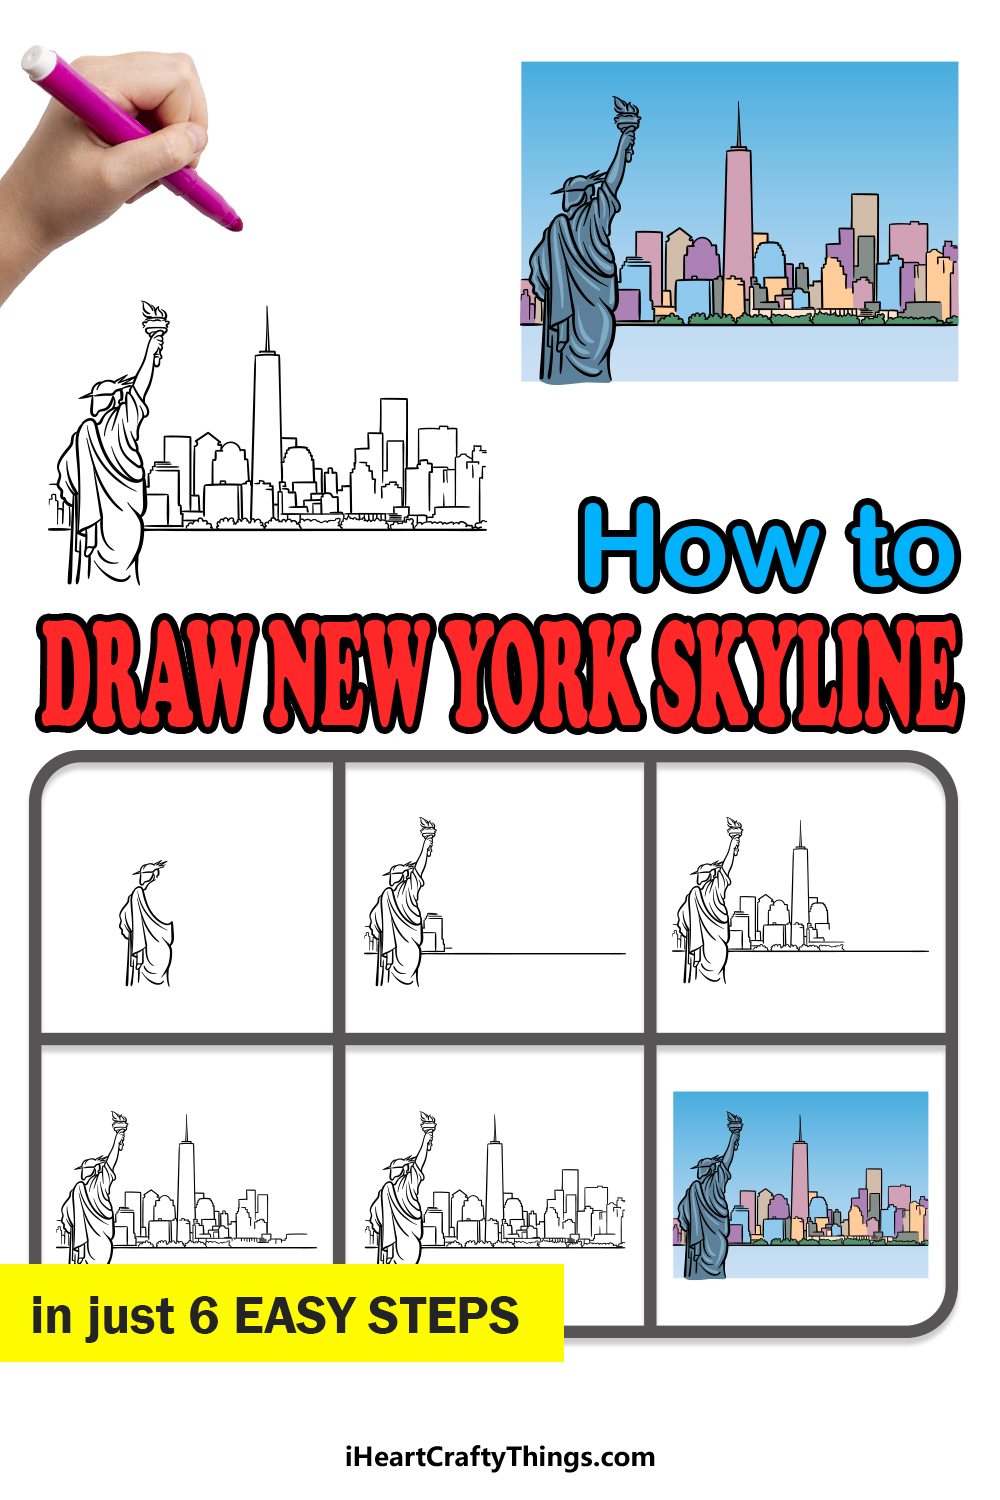 how to draw The New York Skyline in 6 easy steps